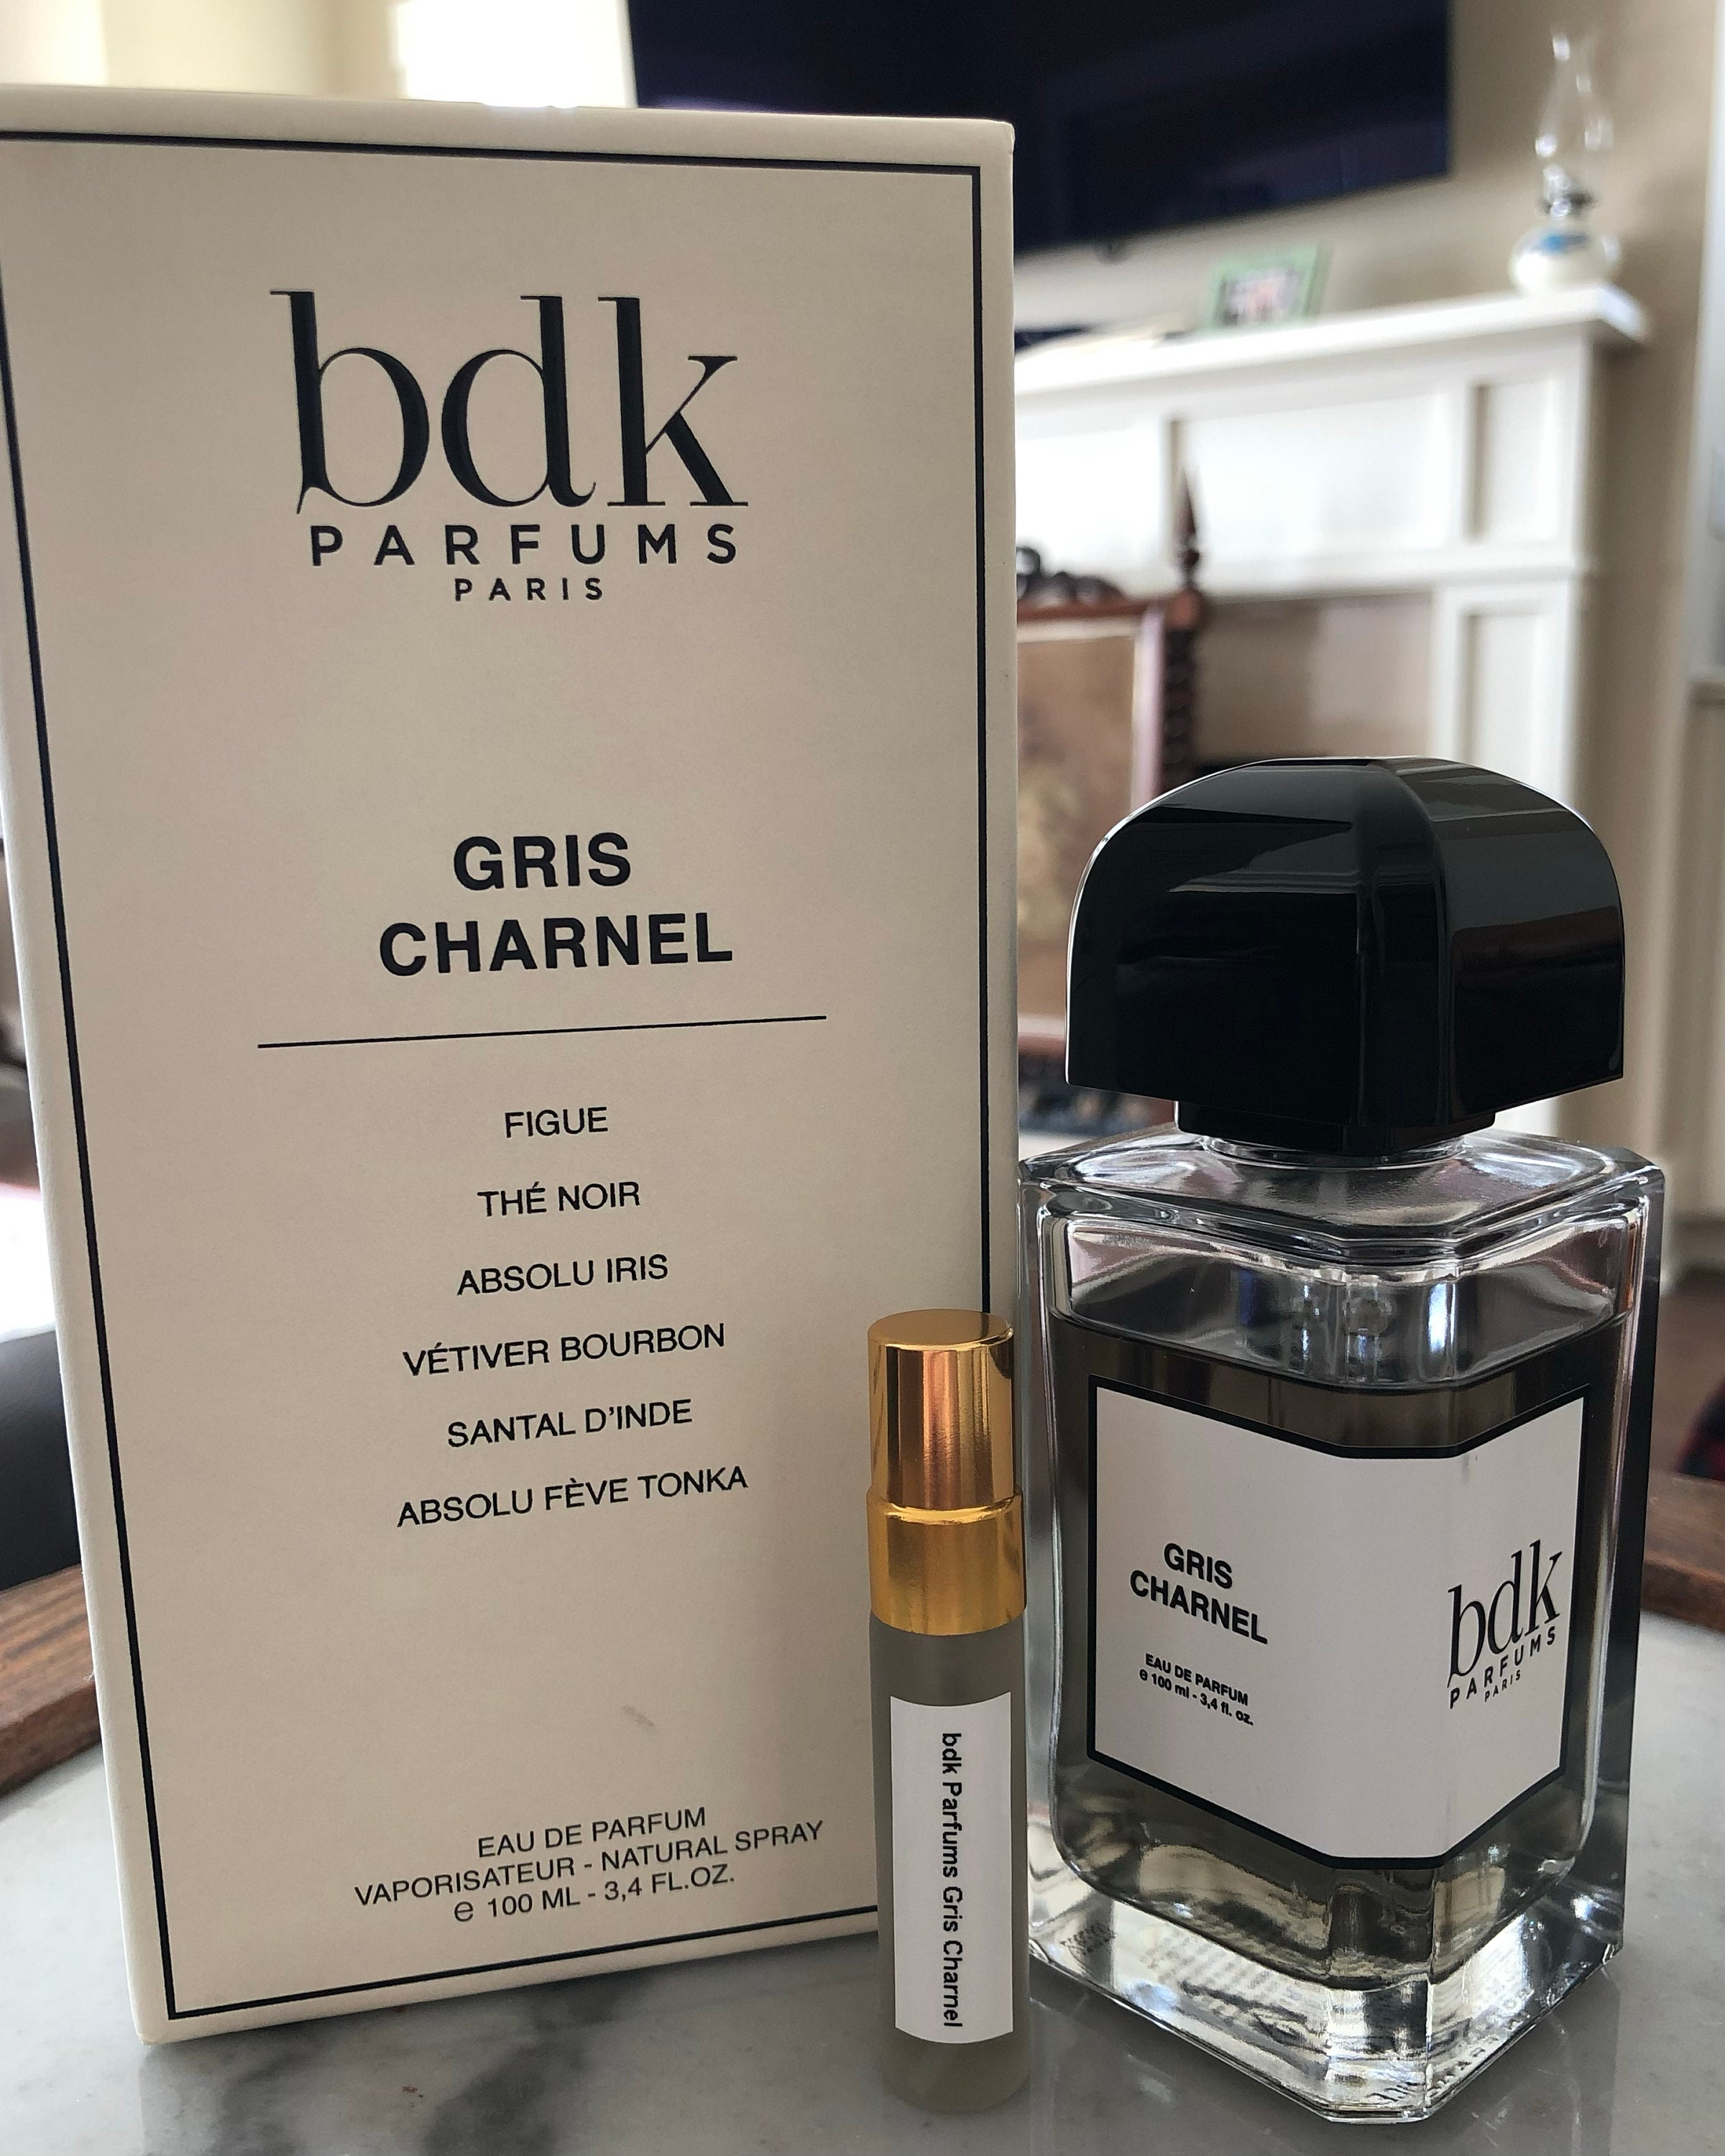 Gris Charnel by Bdk Parfums Paris 3 Ml Decant With Spray 